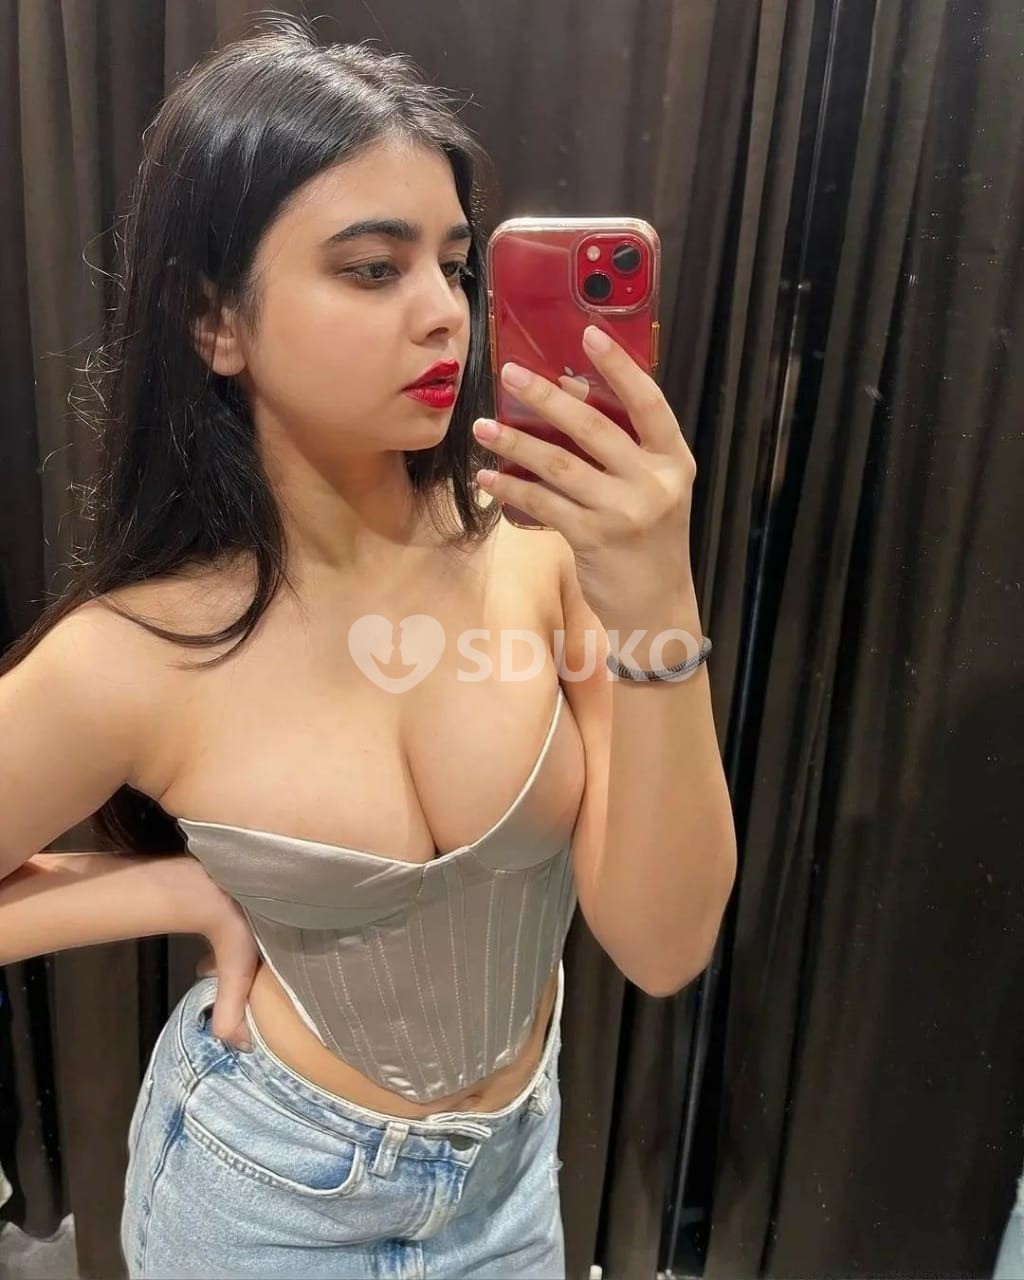 AIROLI VIP TODAY LOW PRICE (;ESCORT 🥰SERVICE 100% SAFE AND SECURE ANYTIME CALL ME 24 X 7 SERVICE AVAILABLE 100% SAFE